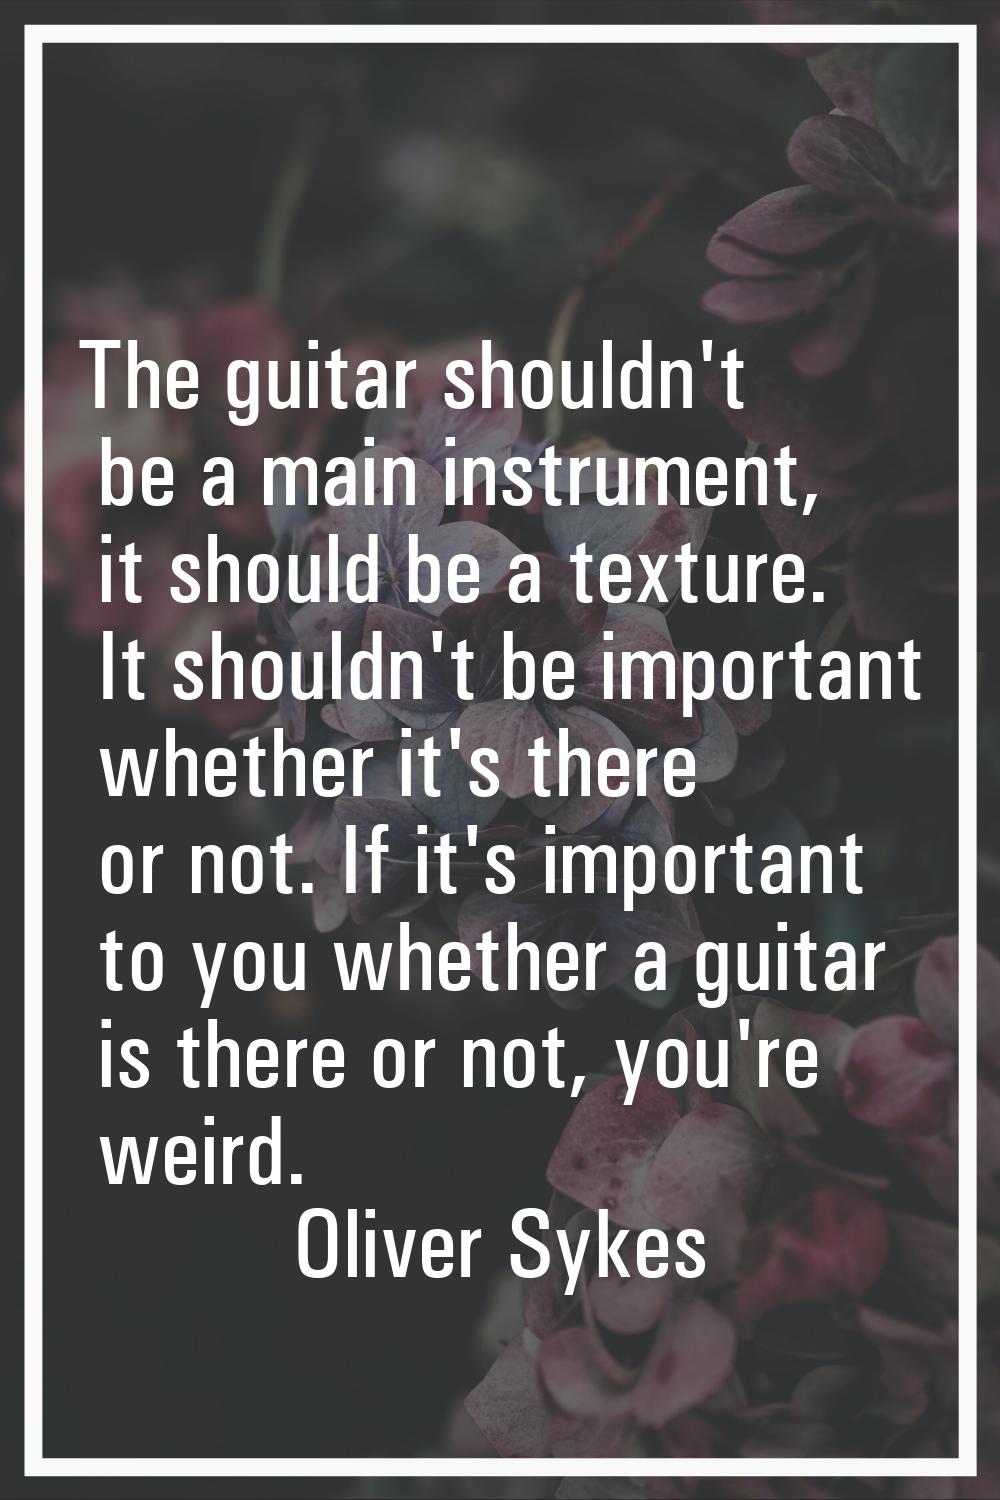 The guitar shouldn't be a main instrument, it should be a texture. It shouldn't be important whethe